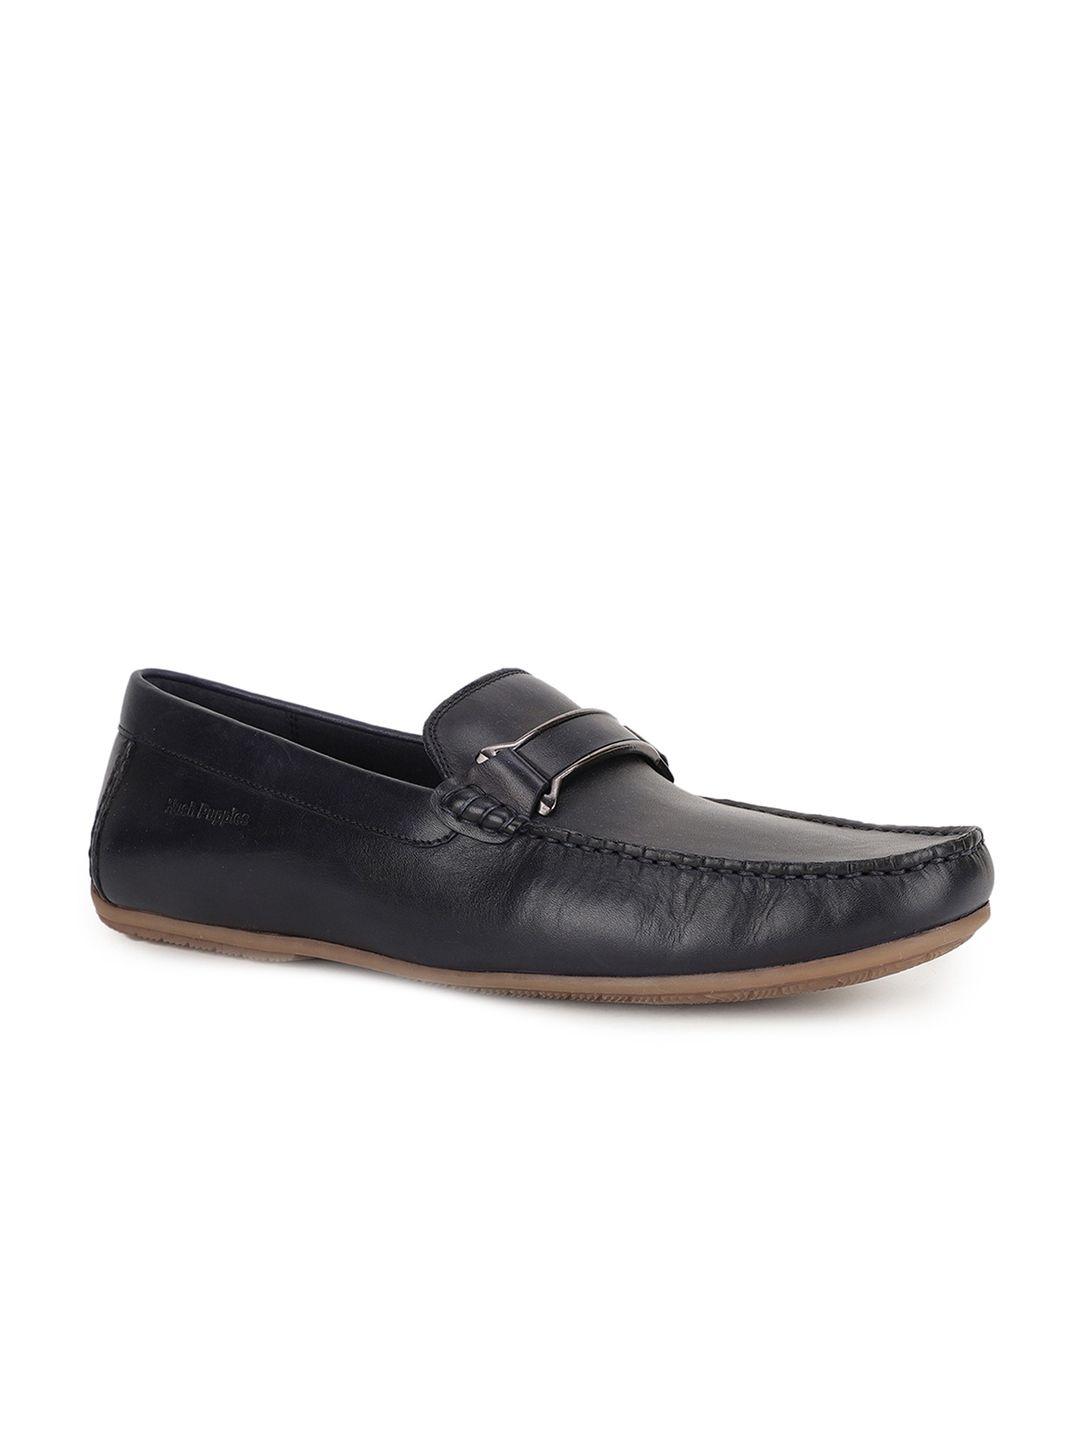 hush-puppies-men-navy-blue-leather-loafers